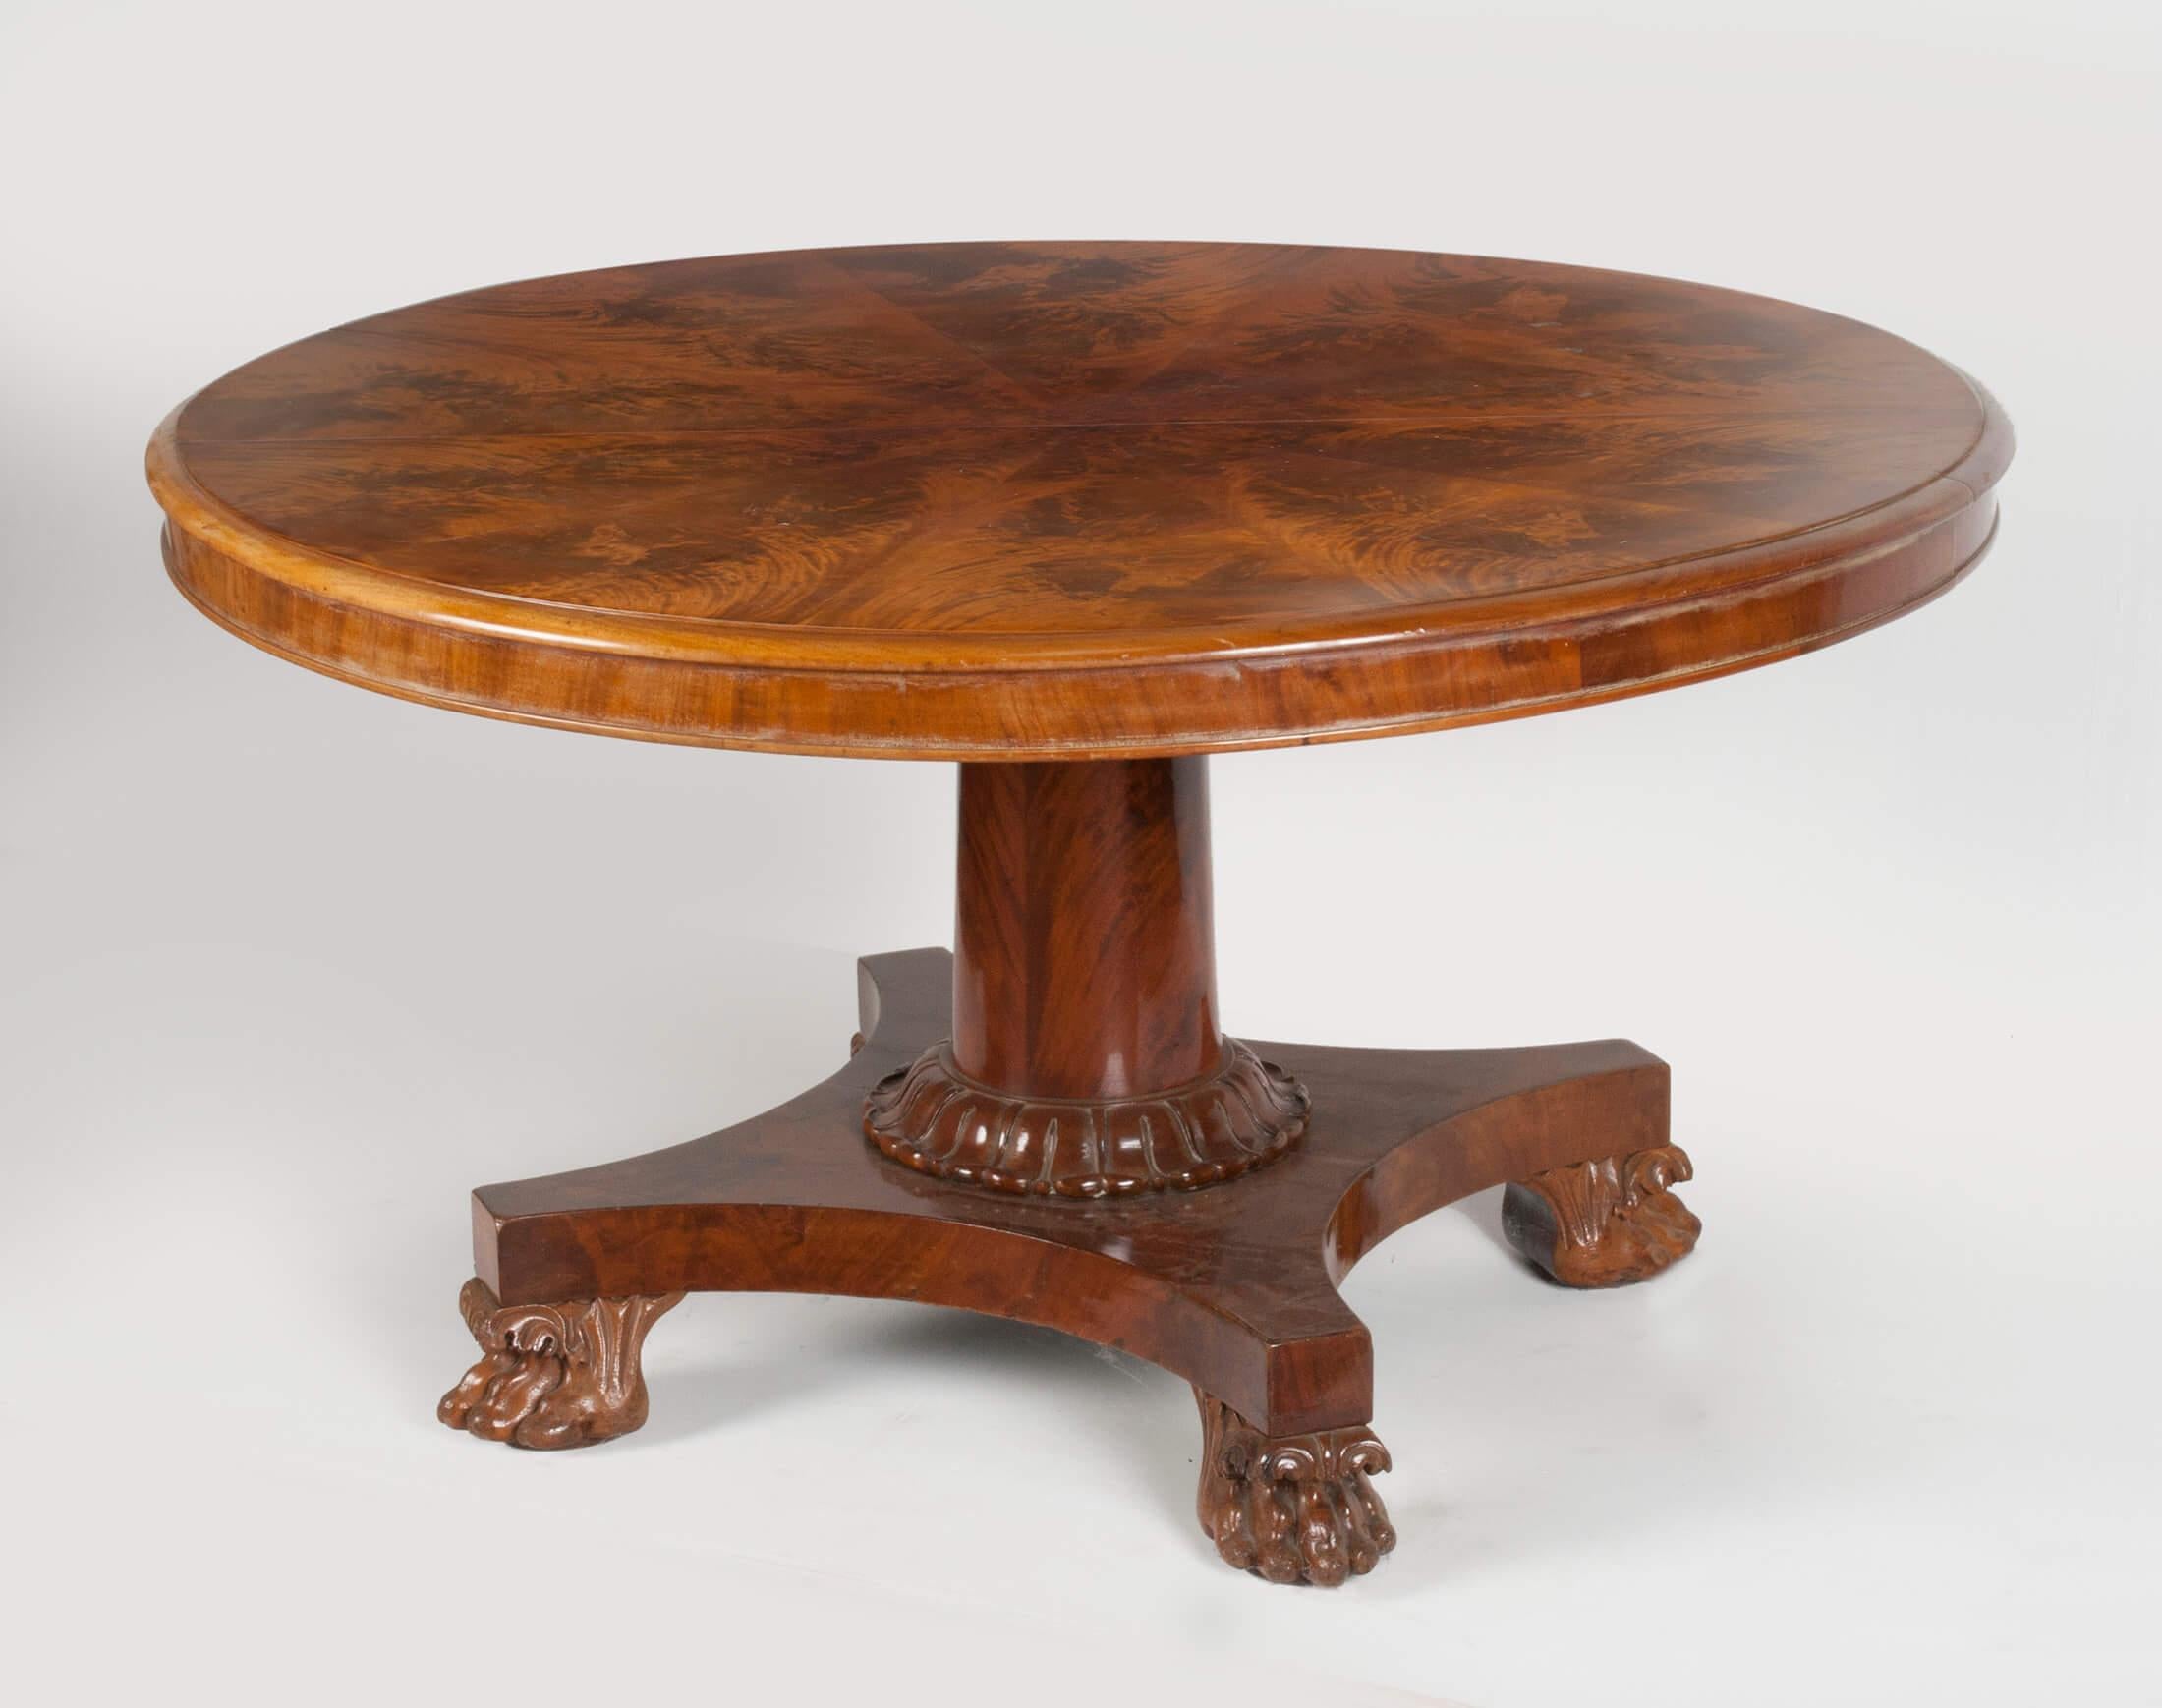 Antique burl mahogany veneered dining table in Empire style. On a pedestal base with claw feet. This table is made in England in 1890-1900. The tabletop is bookmatched veneer. The table is original extensible, but it's without the extension panels.